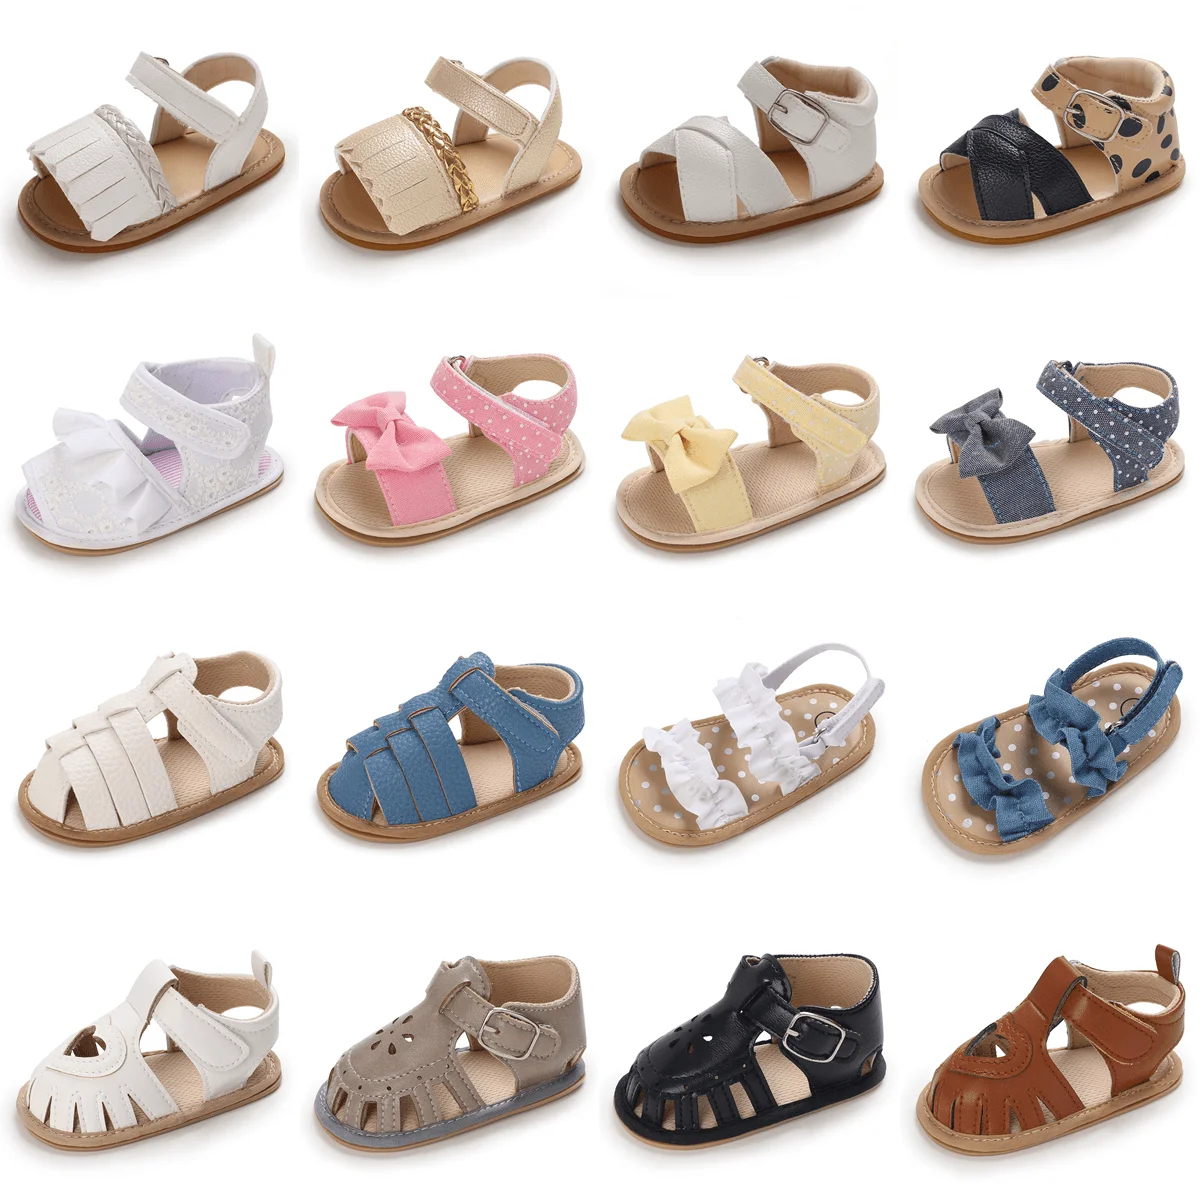 2022 Brand New Baby Shoes Girls Summer Casual Sandals Soft Rubber Sole Non-Slip First Walker White Baptism Toddler